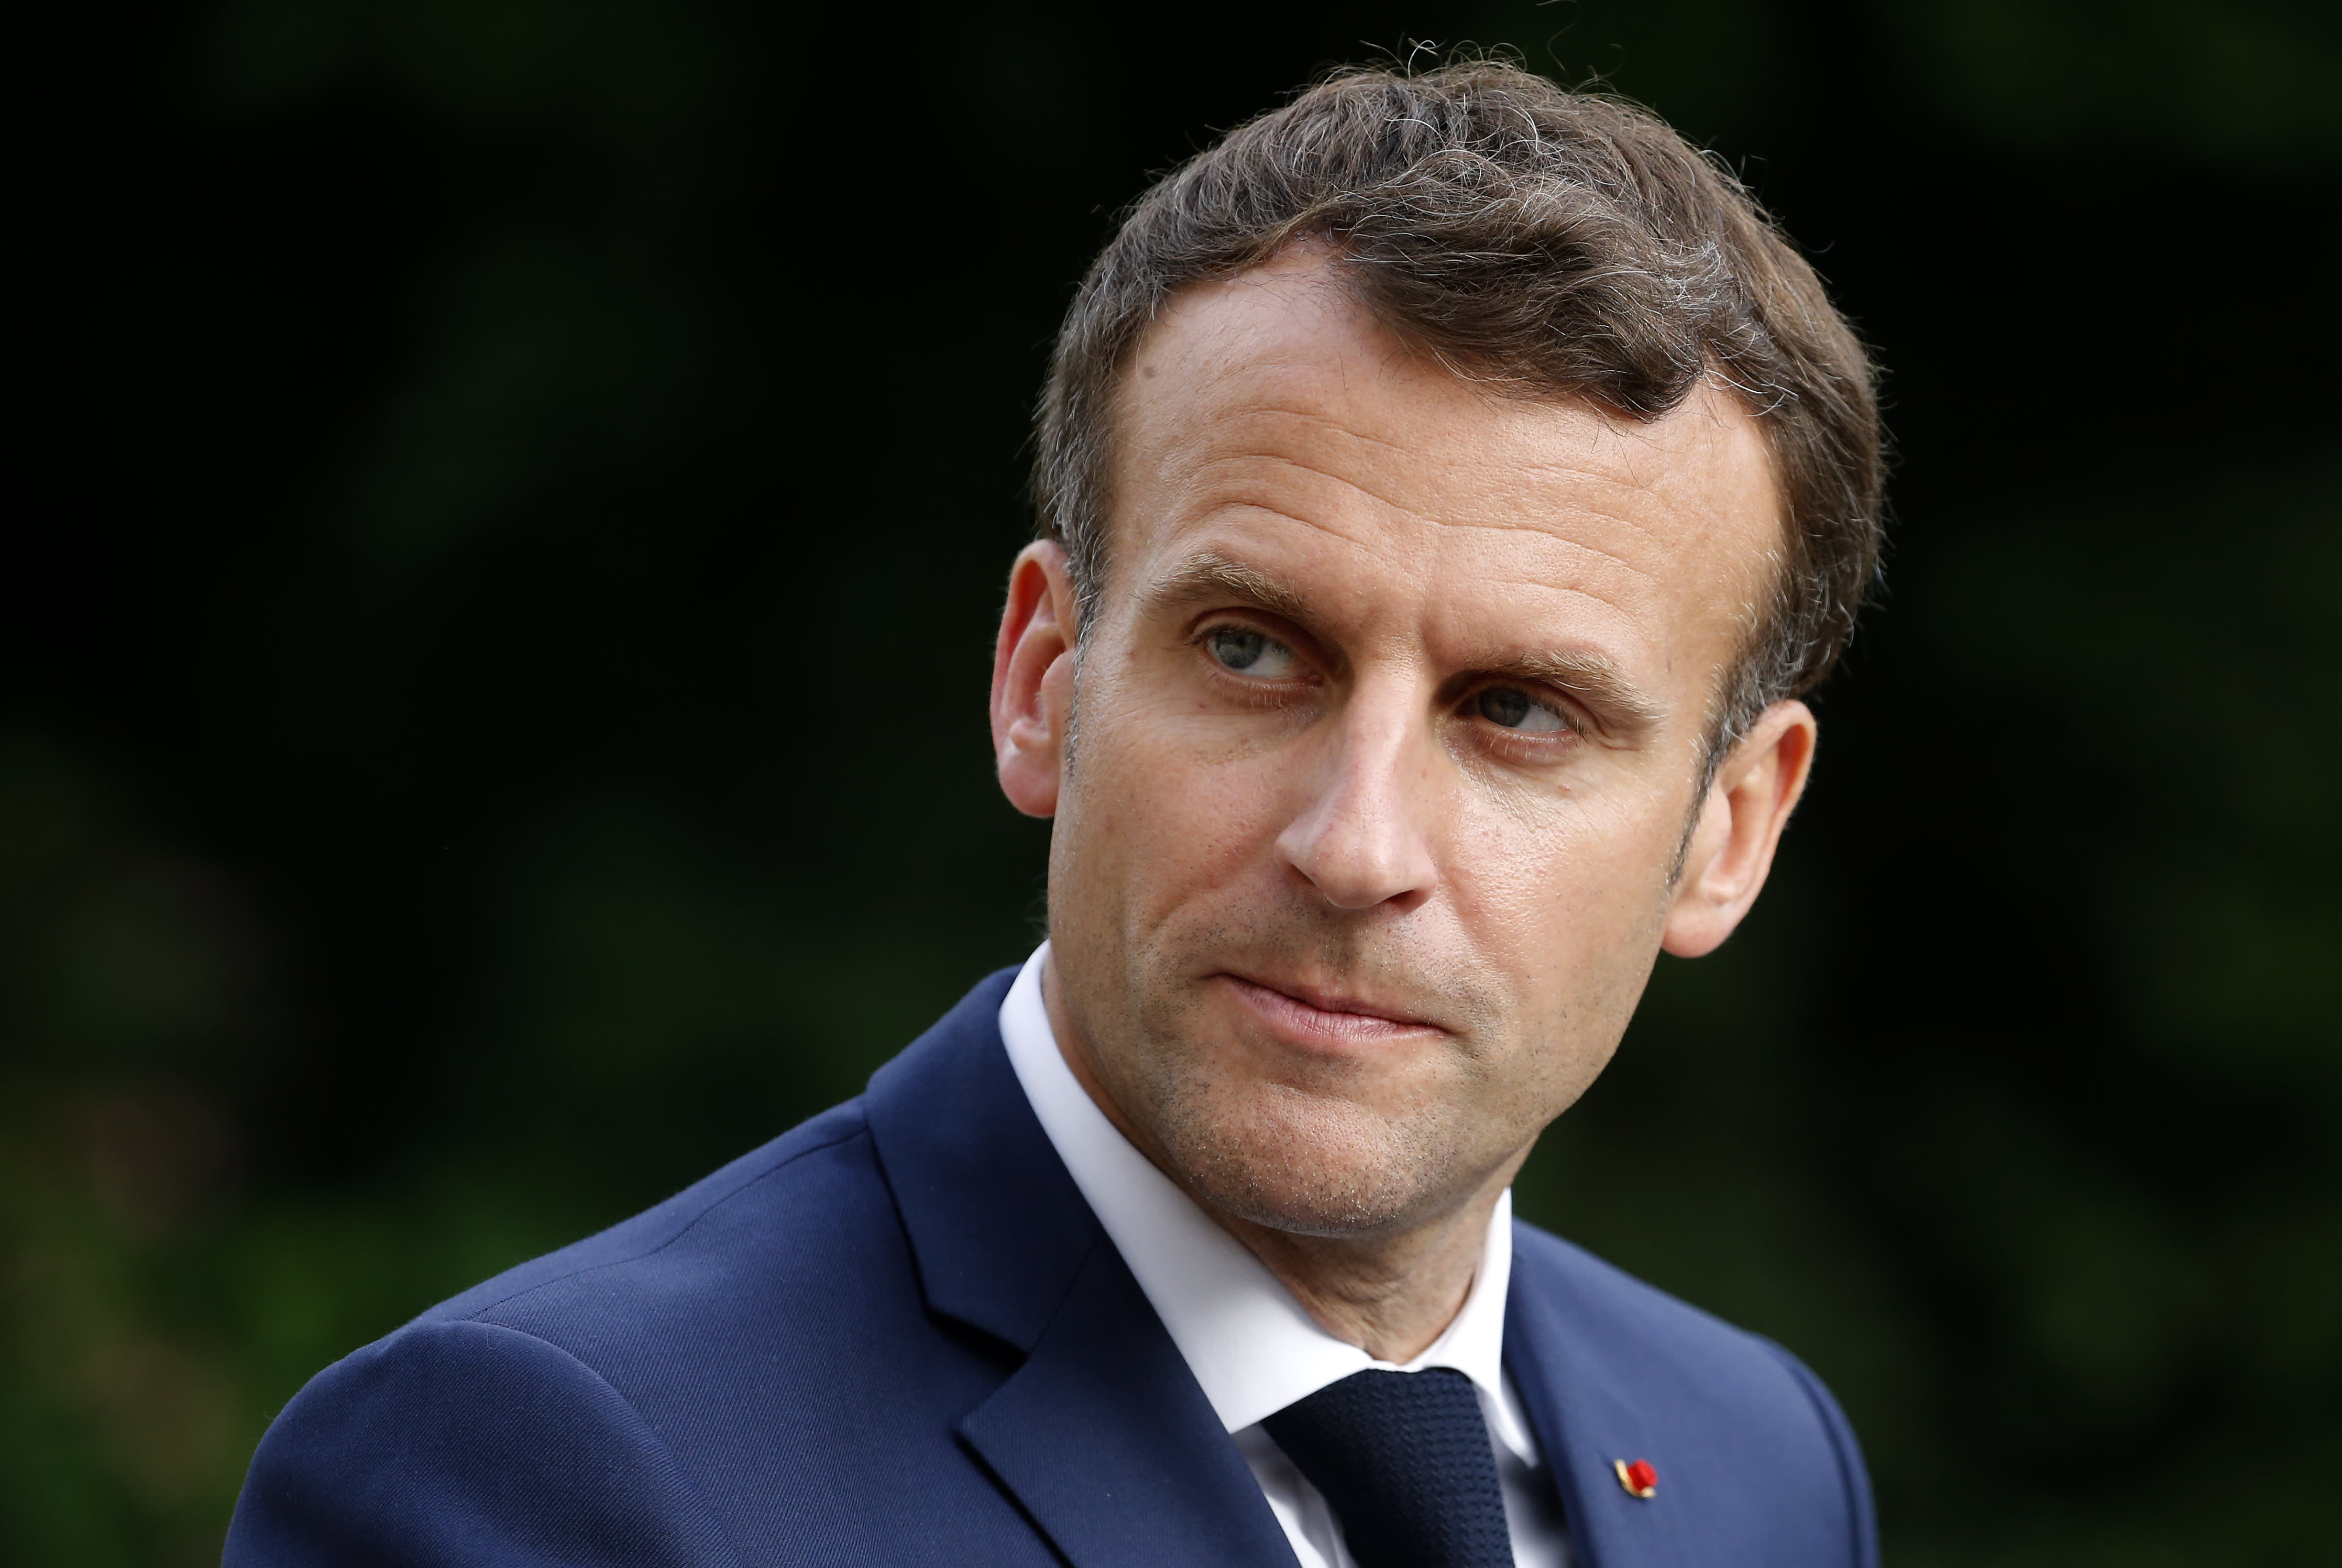 France has one of the lowest retirement ages in the world. And that’s a big headache for Macron